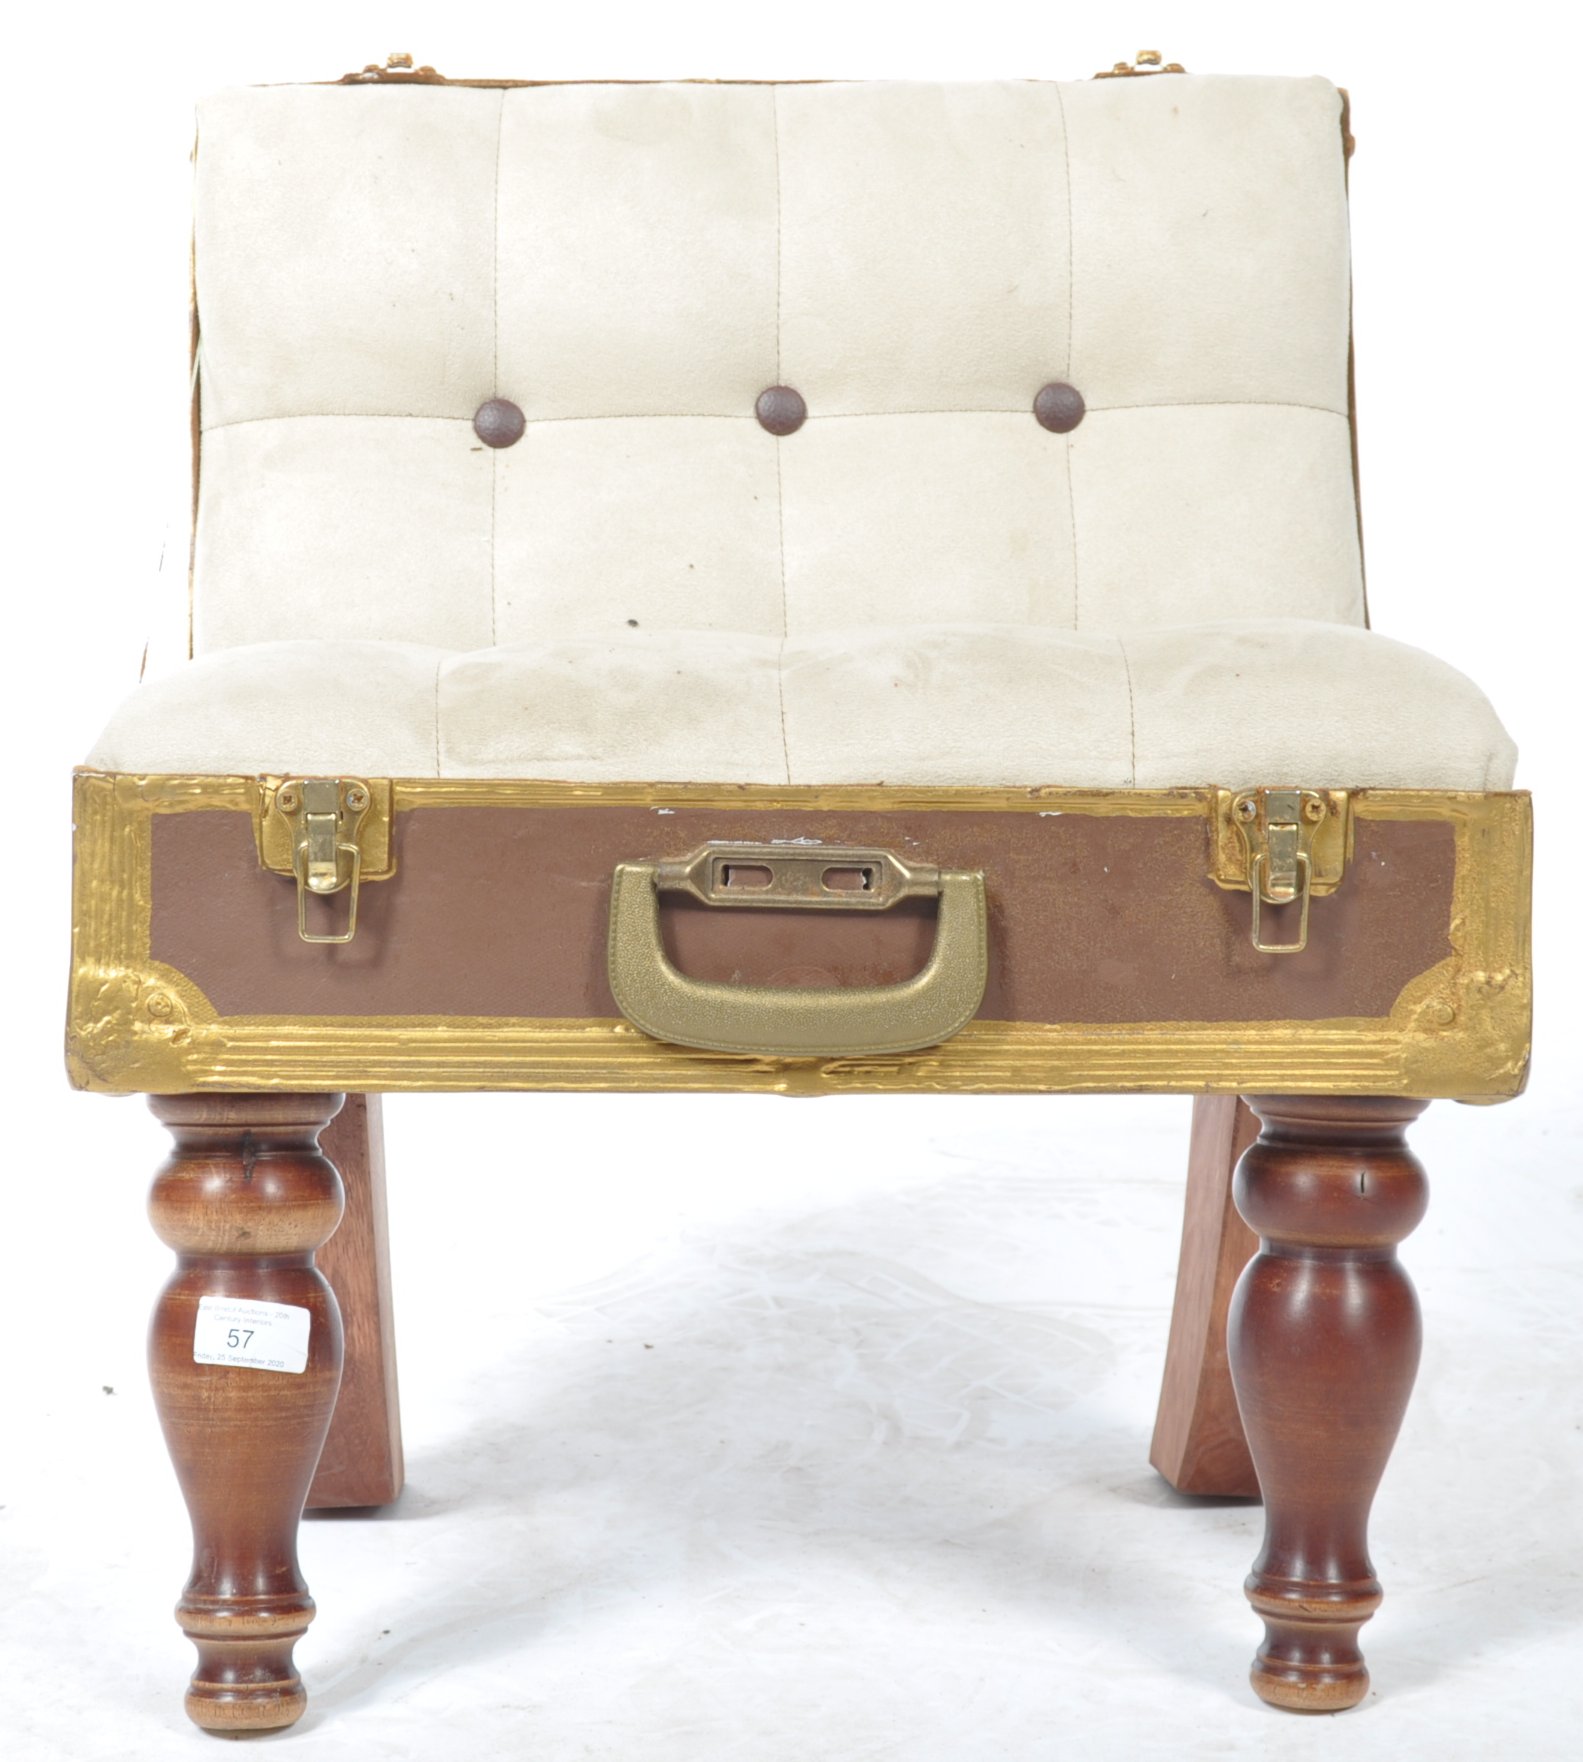 UNUSUAL BUTTON BACK CHAIR IN THE FORM A TRAVEL SUITCASE - Image 3 of 7